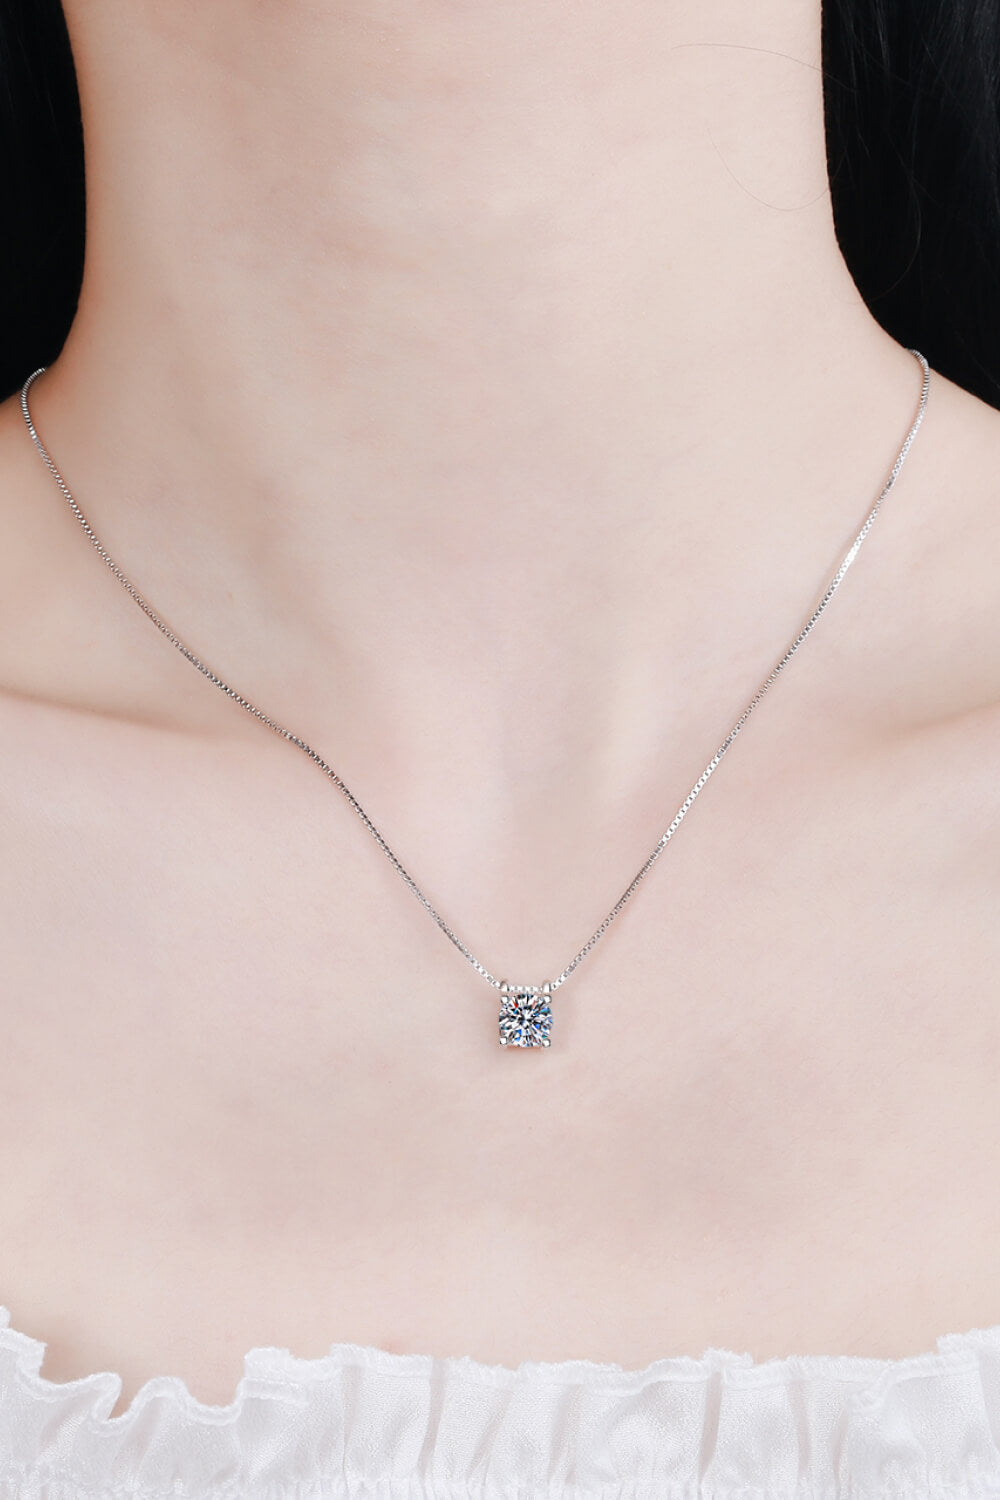 1 Carat Moissanite 925 Sterling Silver Chain Necklace 💜